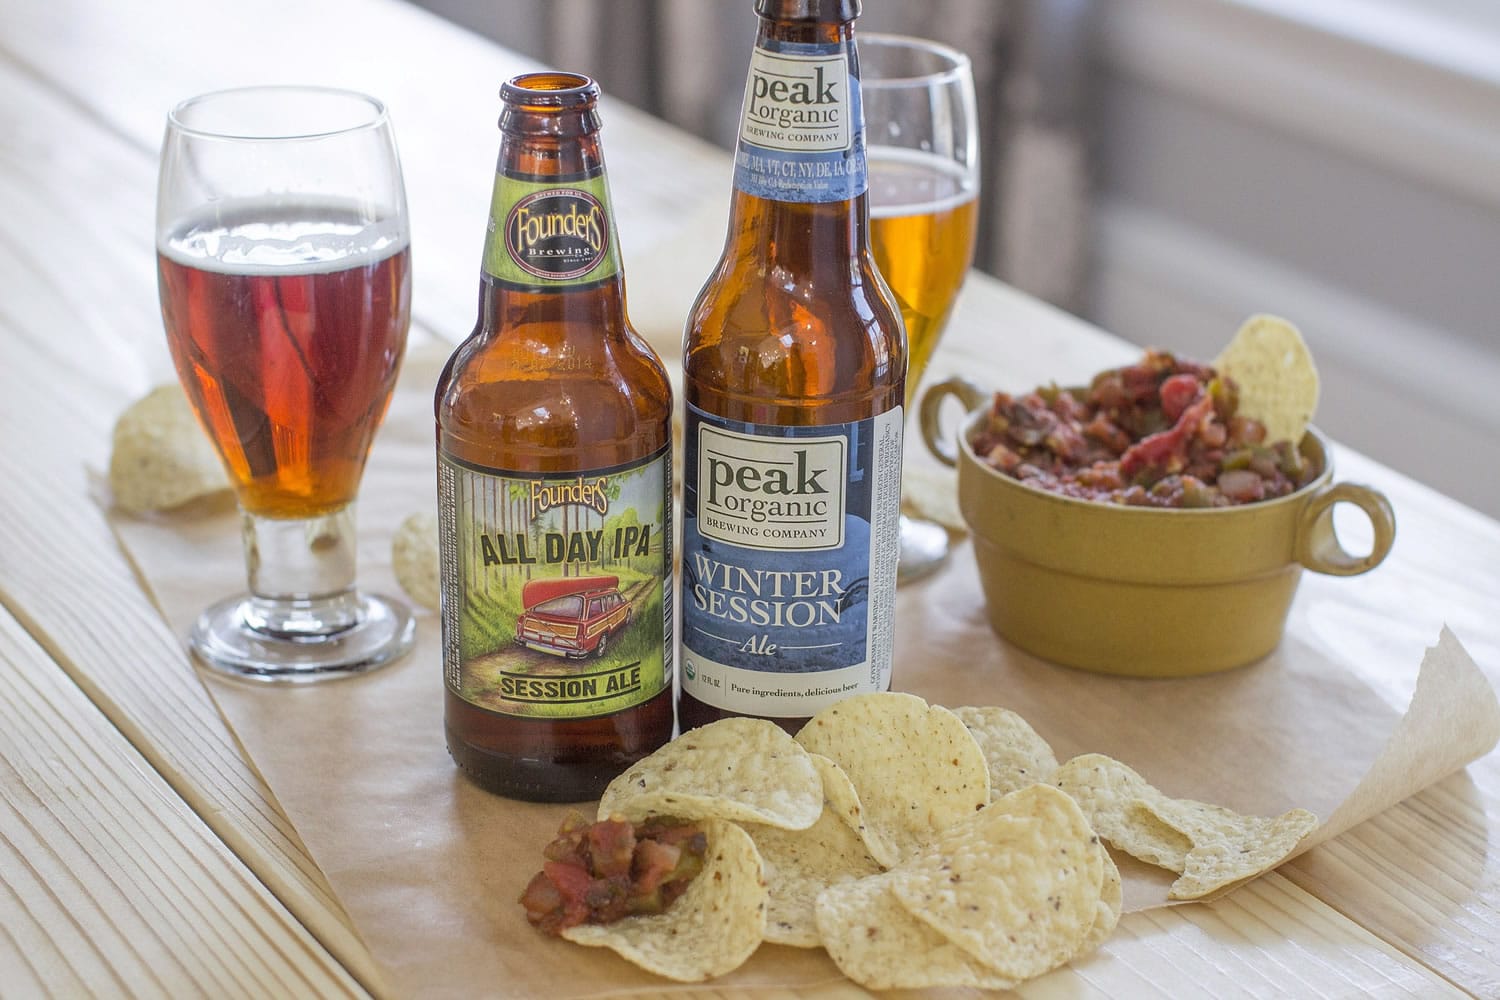 Lower alcohol craft beers include Founders All Day IPA and Peak Organic Winter Session Ale.